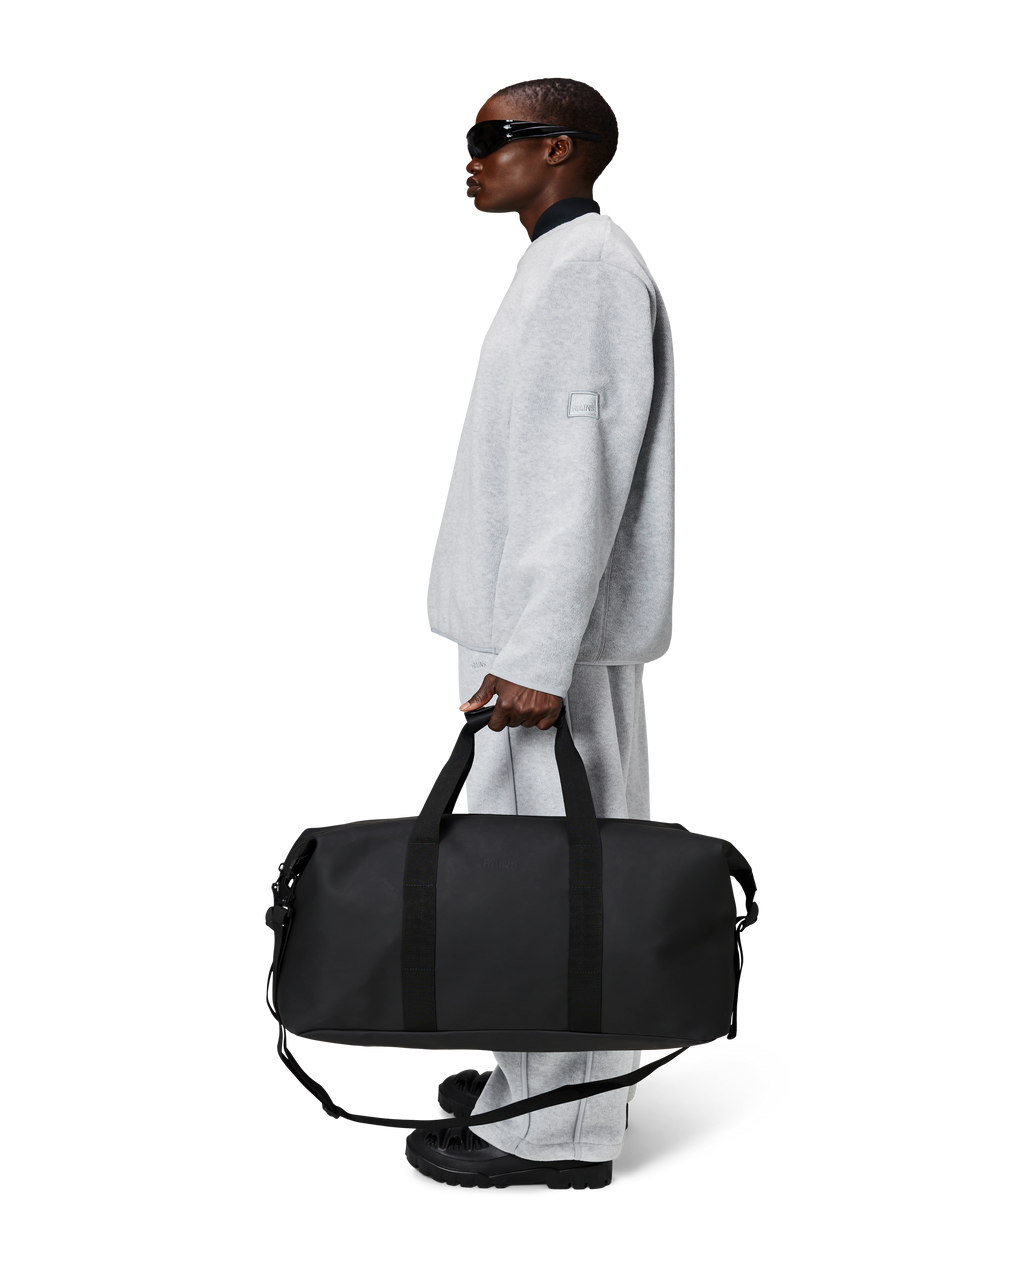 Rains® Hilo Weekend Bag in Black for $110 | Free Shipping